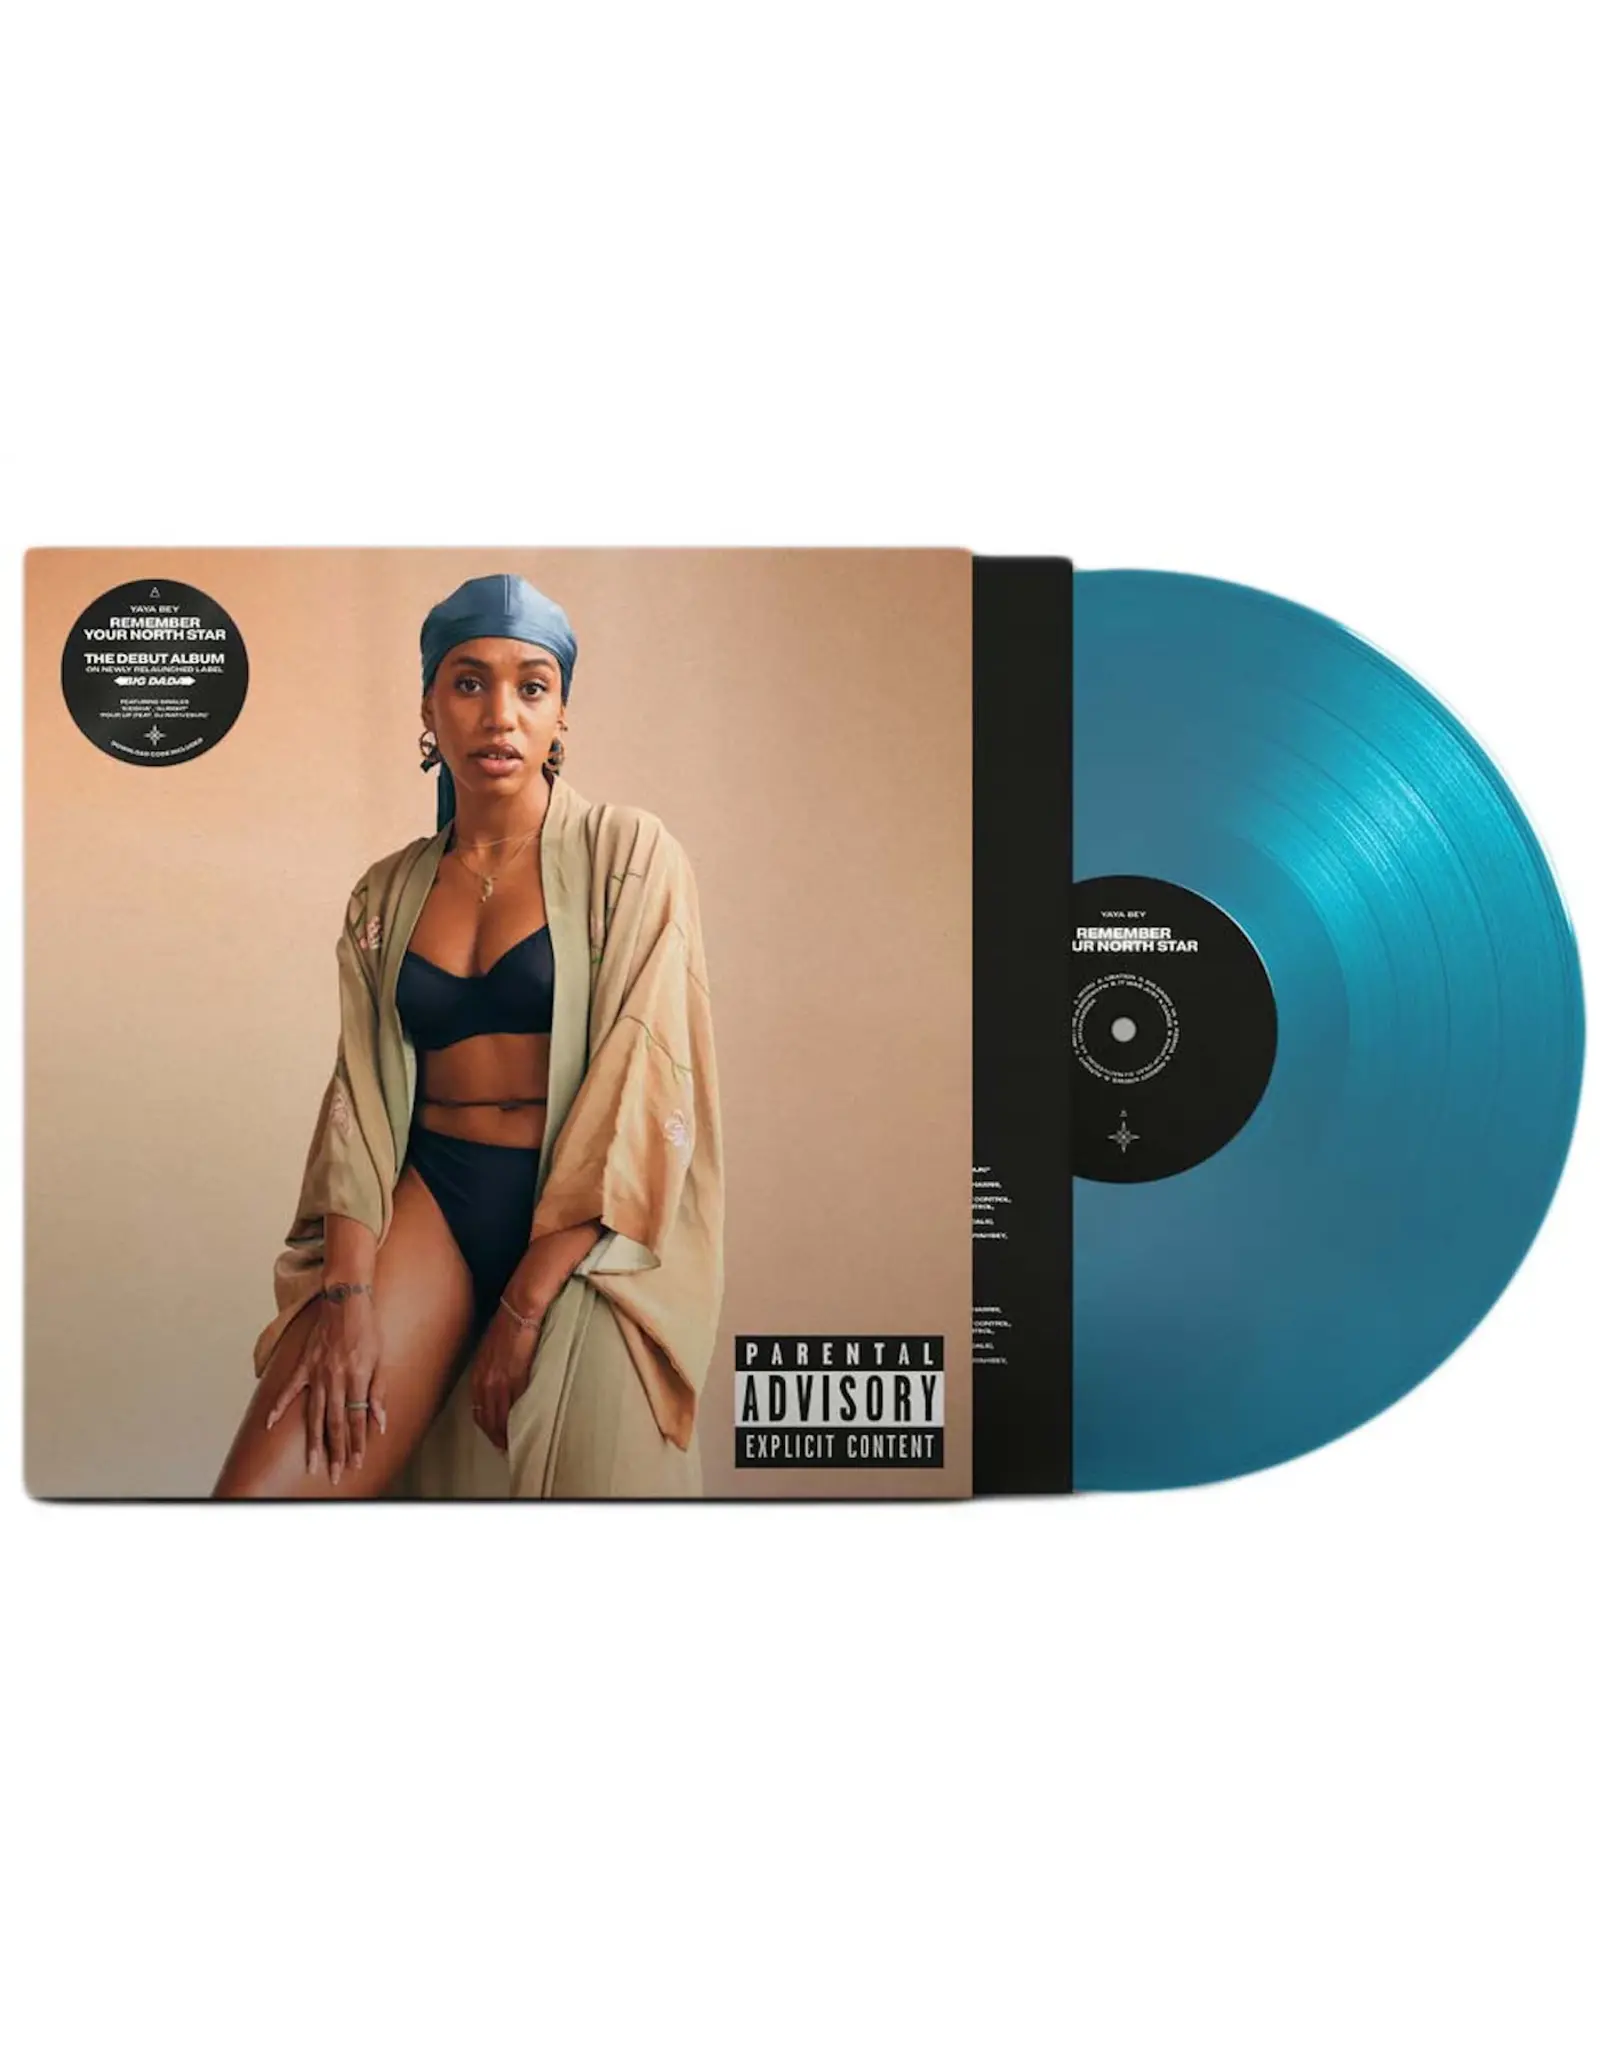 Yaya Bey - Remember Your North Star (Blue Curacao Vinyl)